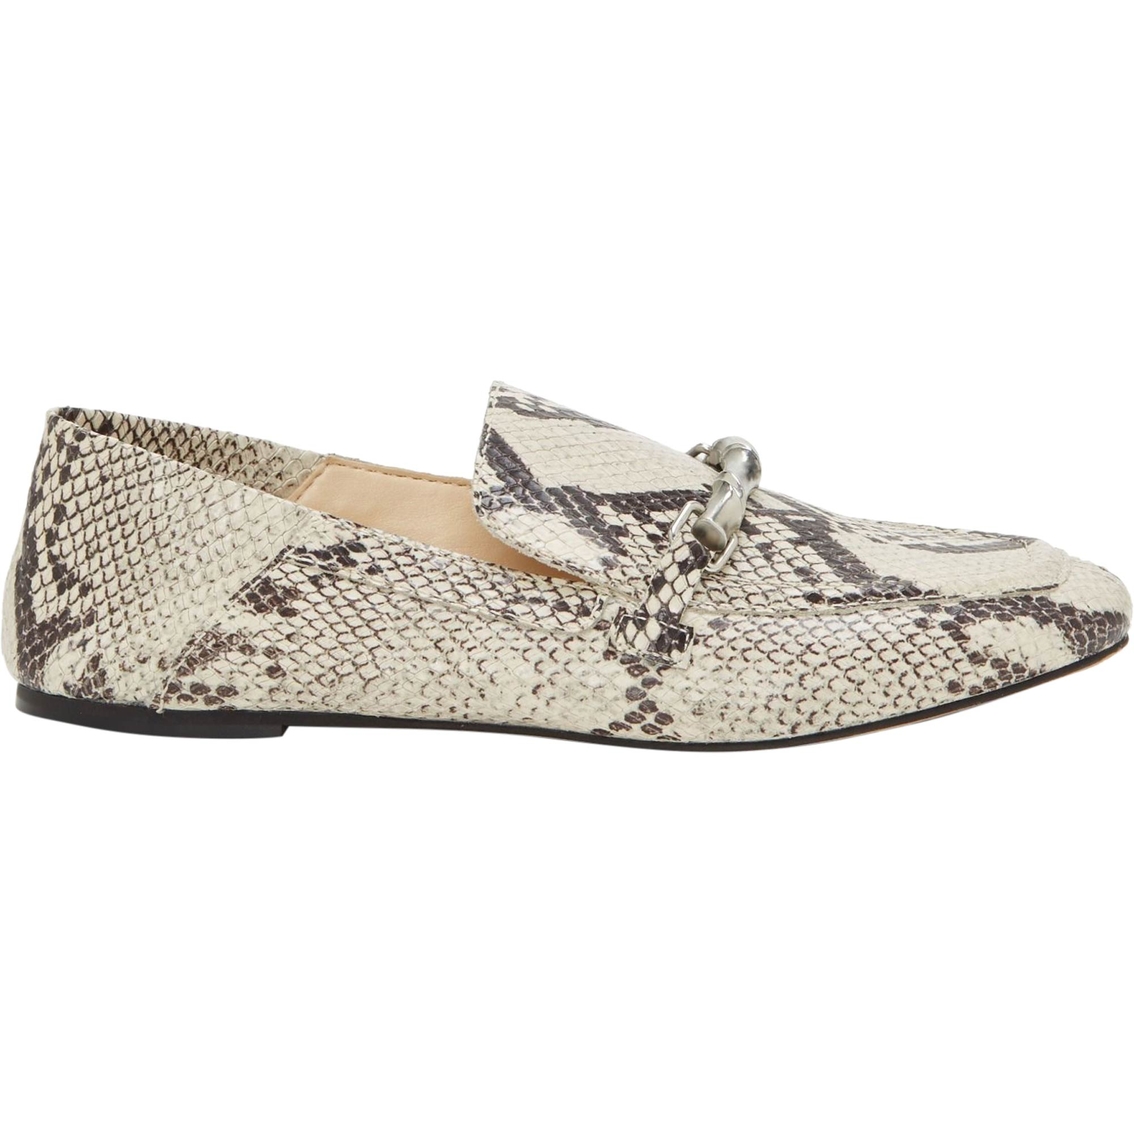 Vince Camuto Perenna Loafer - Image 2 of 10